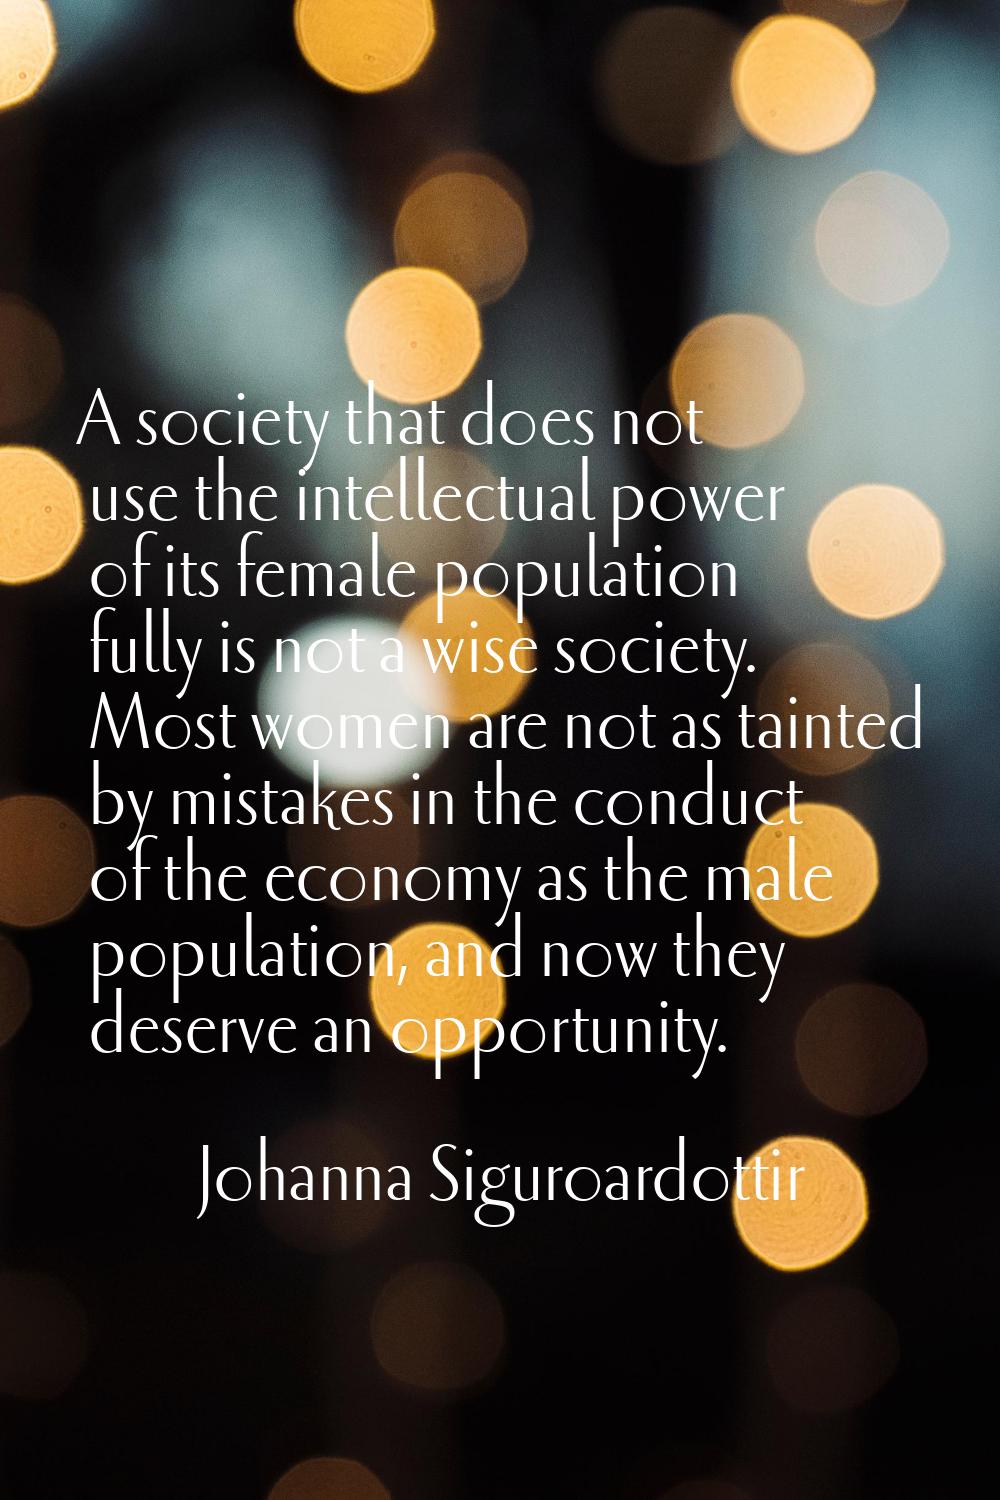 A society that does not use the intellectual power of its female population fully is not a wise soc